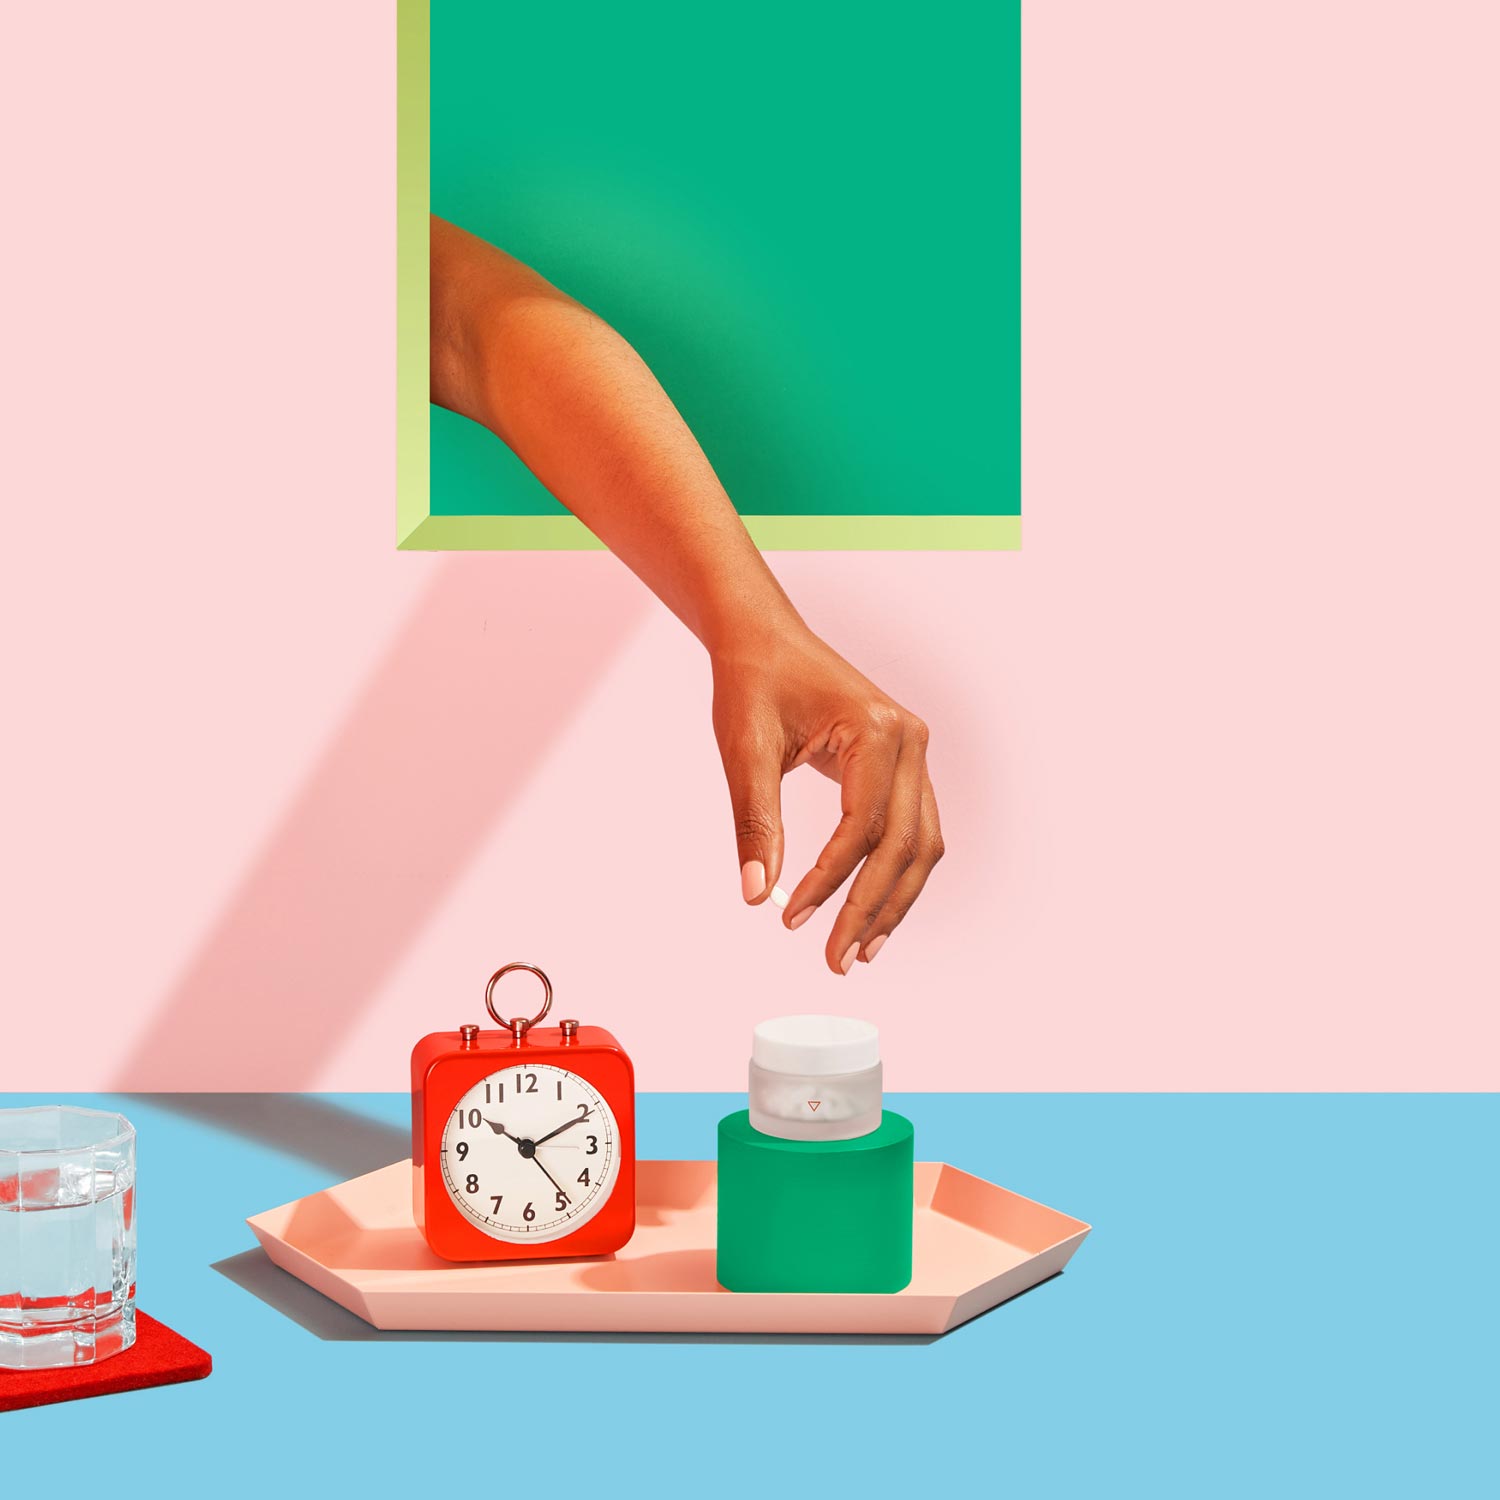 Woman's hand reaching for medication on pink and blue background with alarm clock